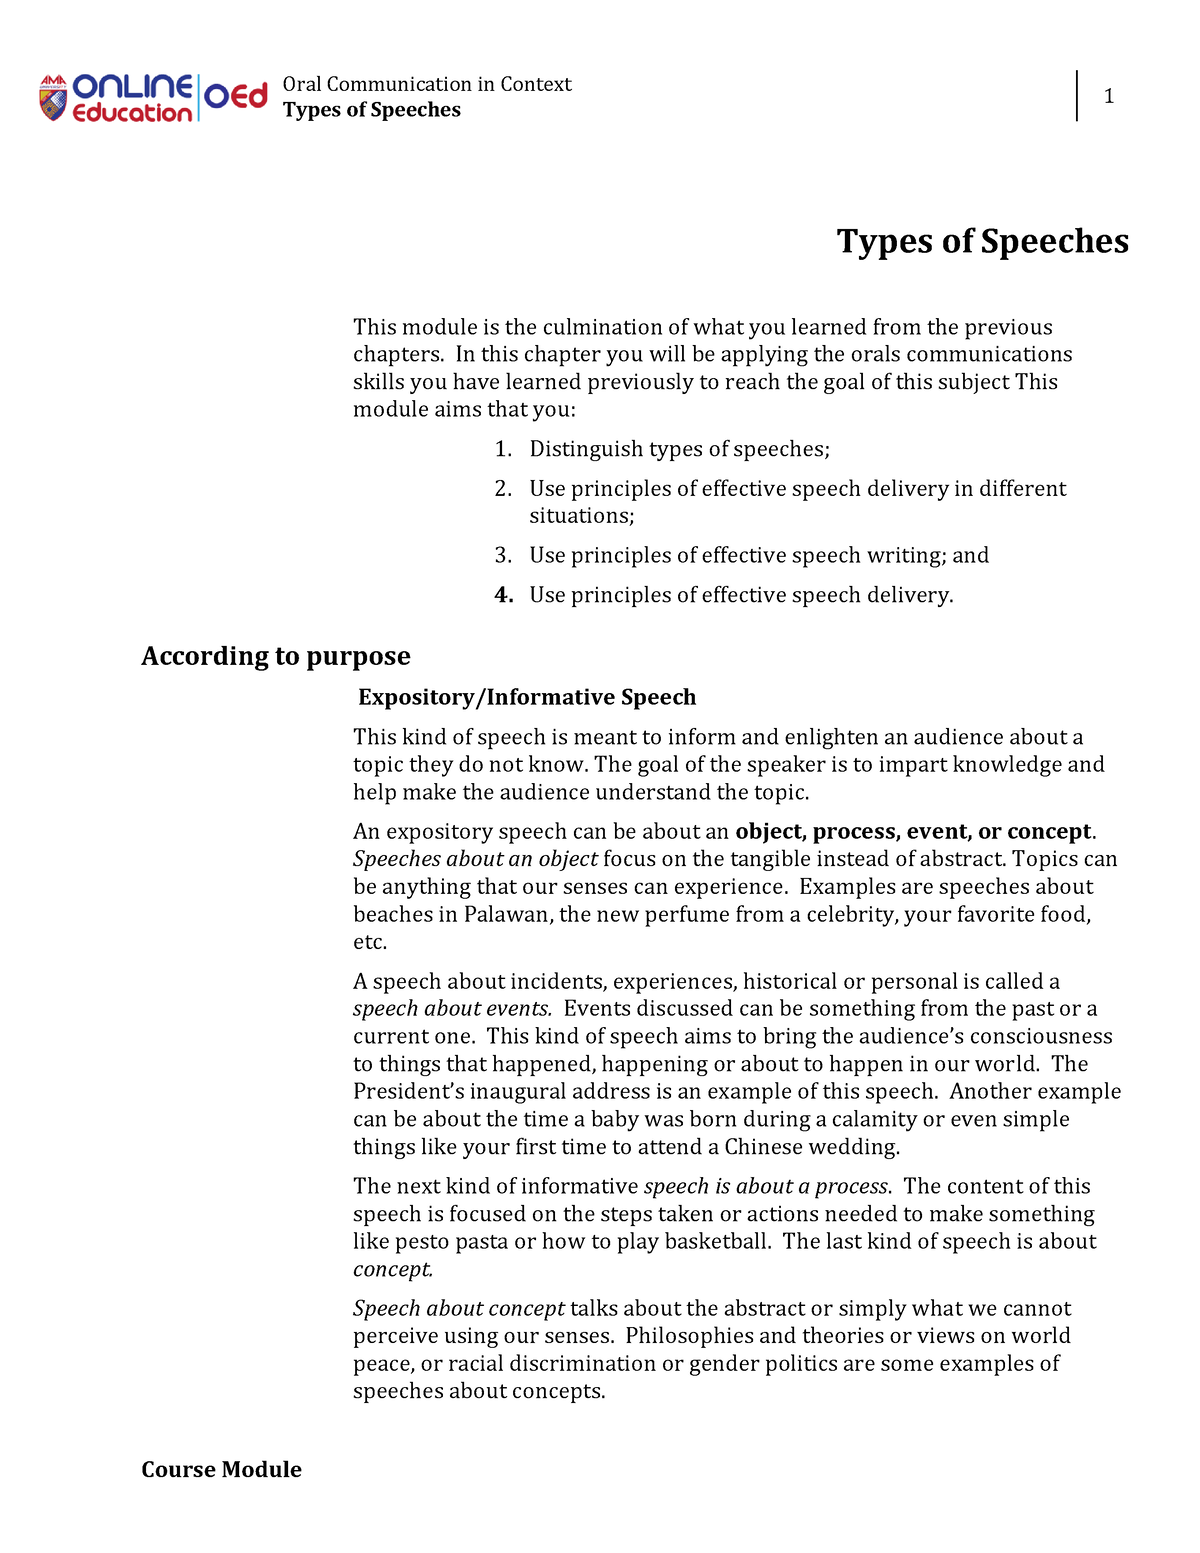 types of speeches oral communication module